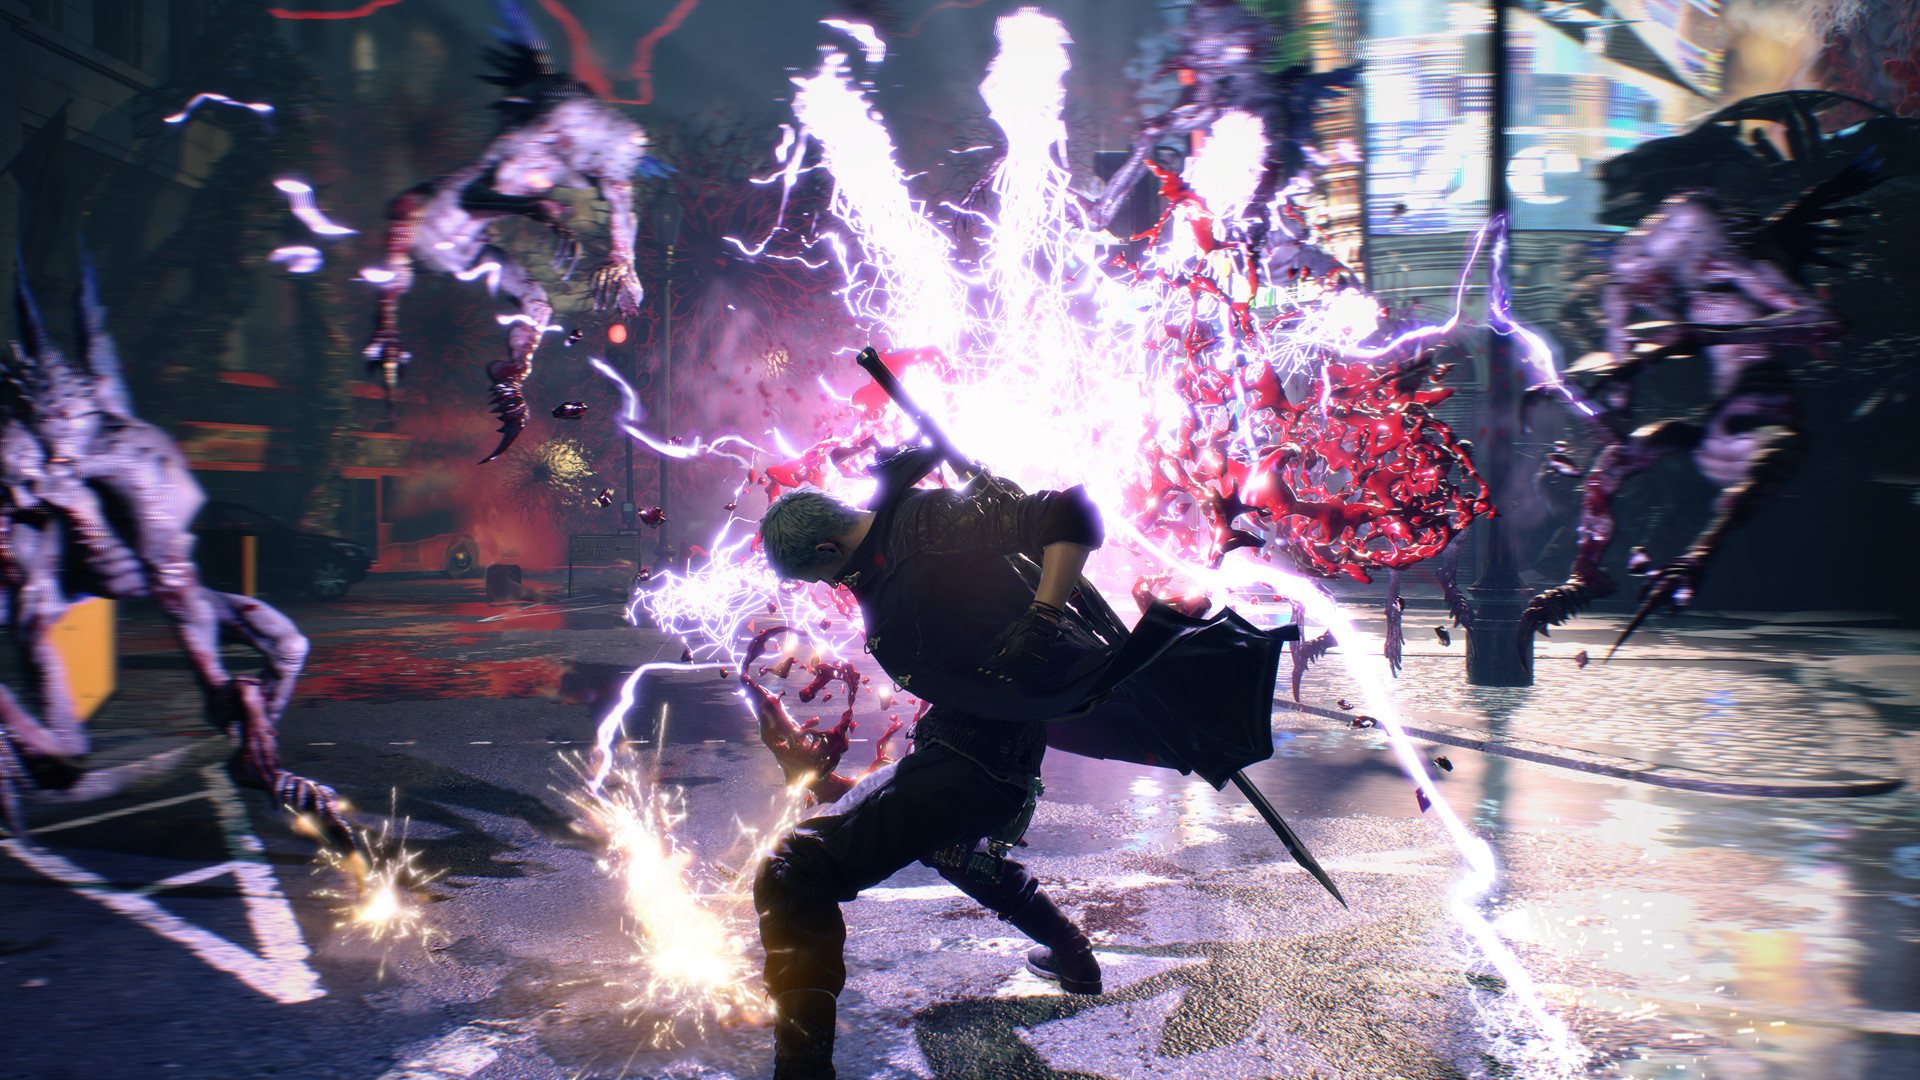 Devil May Cry 5 PlayStation 4 Account pixelpuffin.net Activation Link 13.55 usd